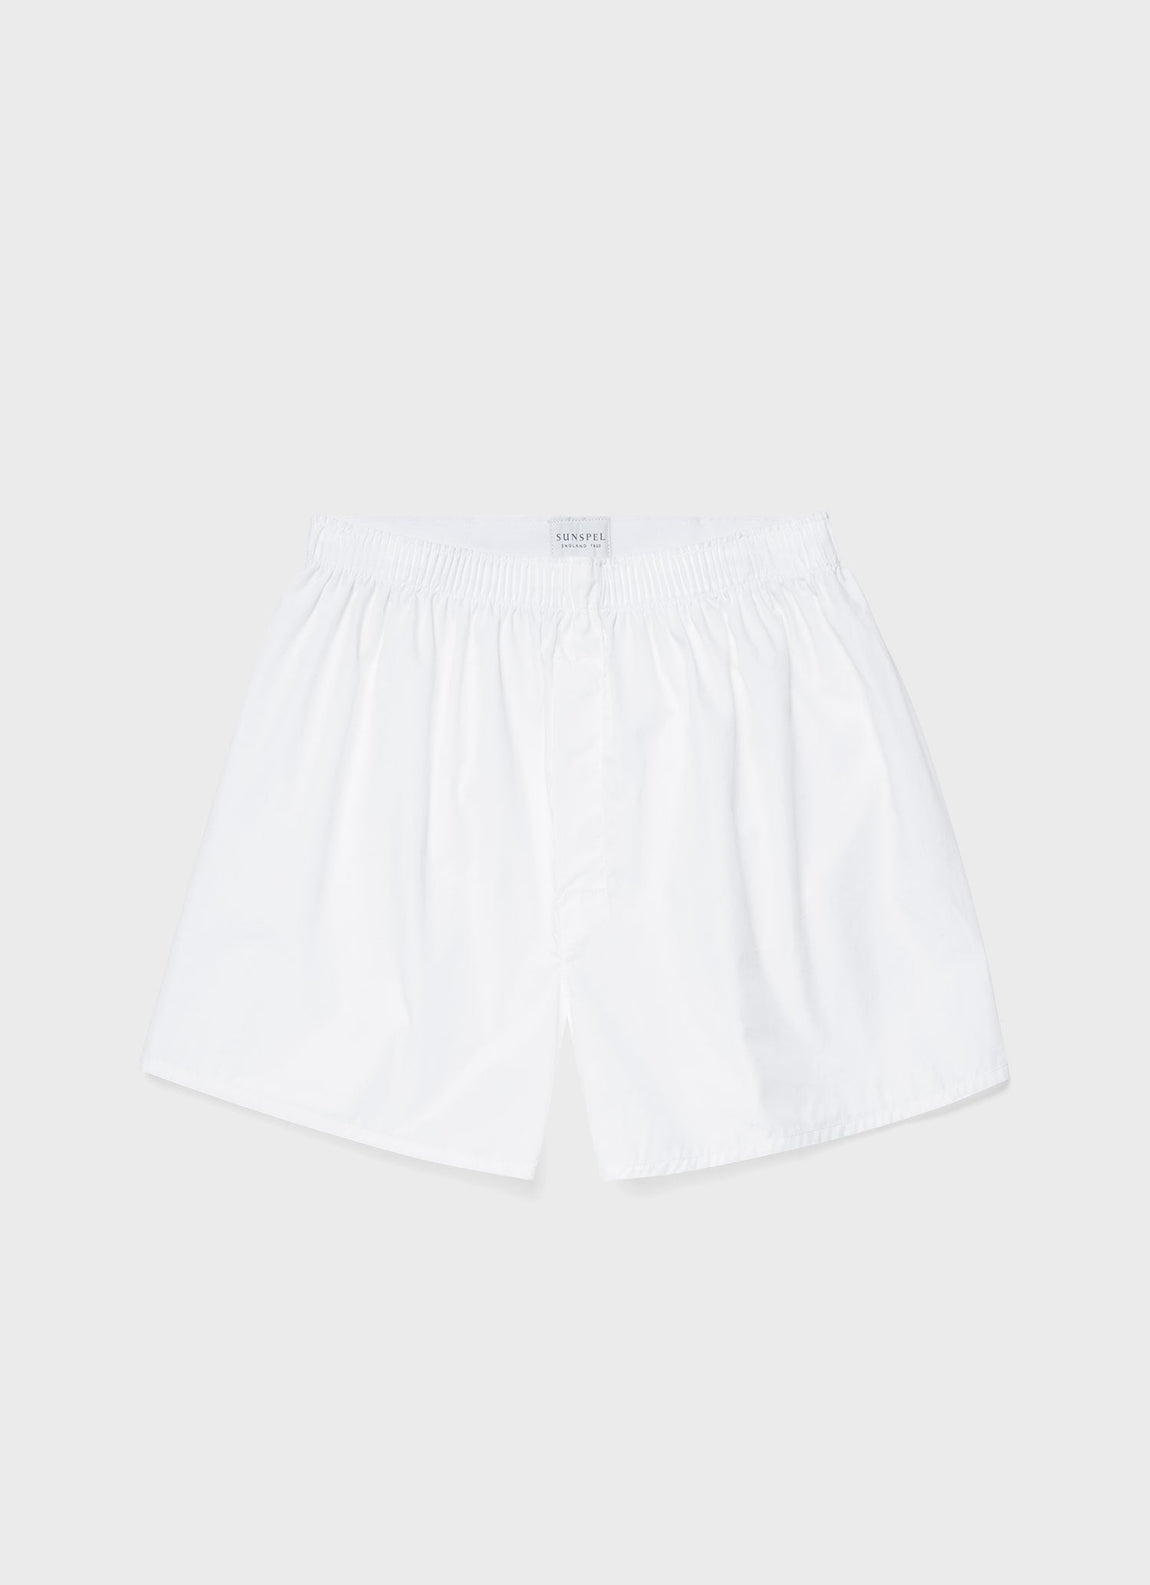 Calcify Boxer Brief - White Bull Clothing Co